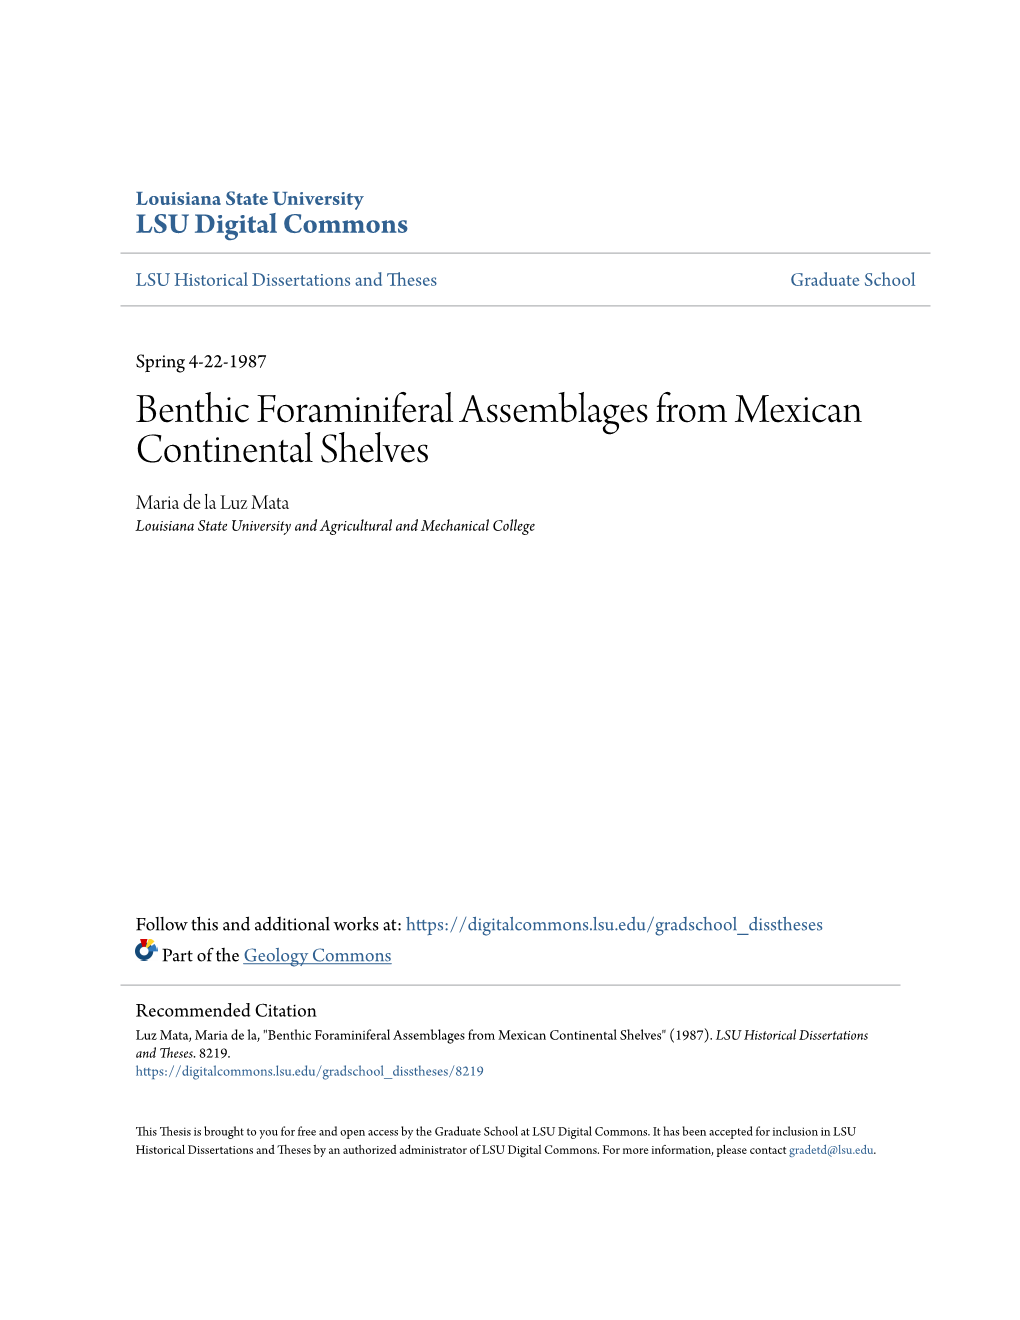 Benthic Foraminiferal Assemblages from Mexican Continental Shelves Maria De La Luz Mata Louisiana State University and Agricultural and Mechanical College